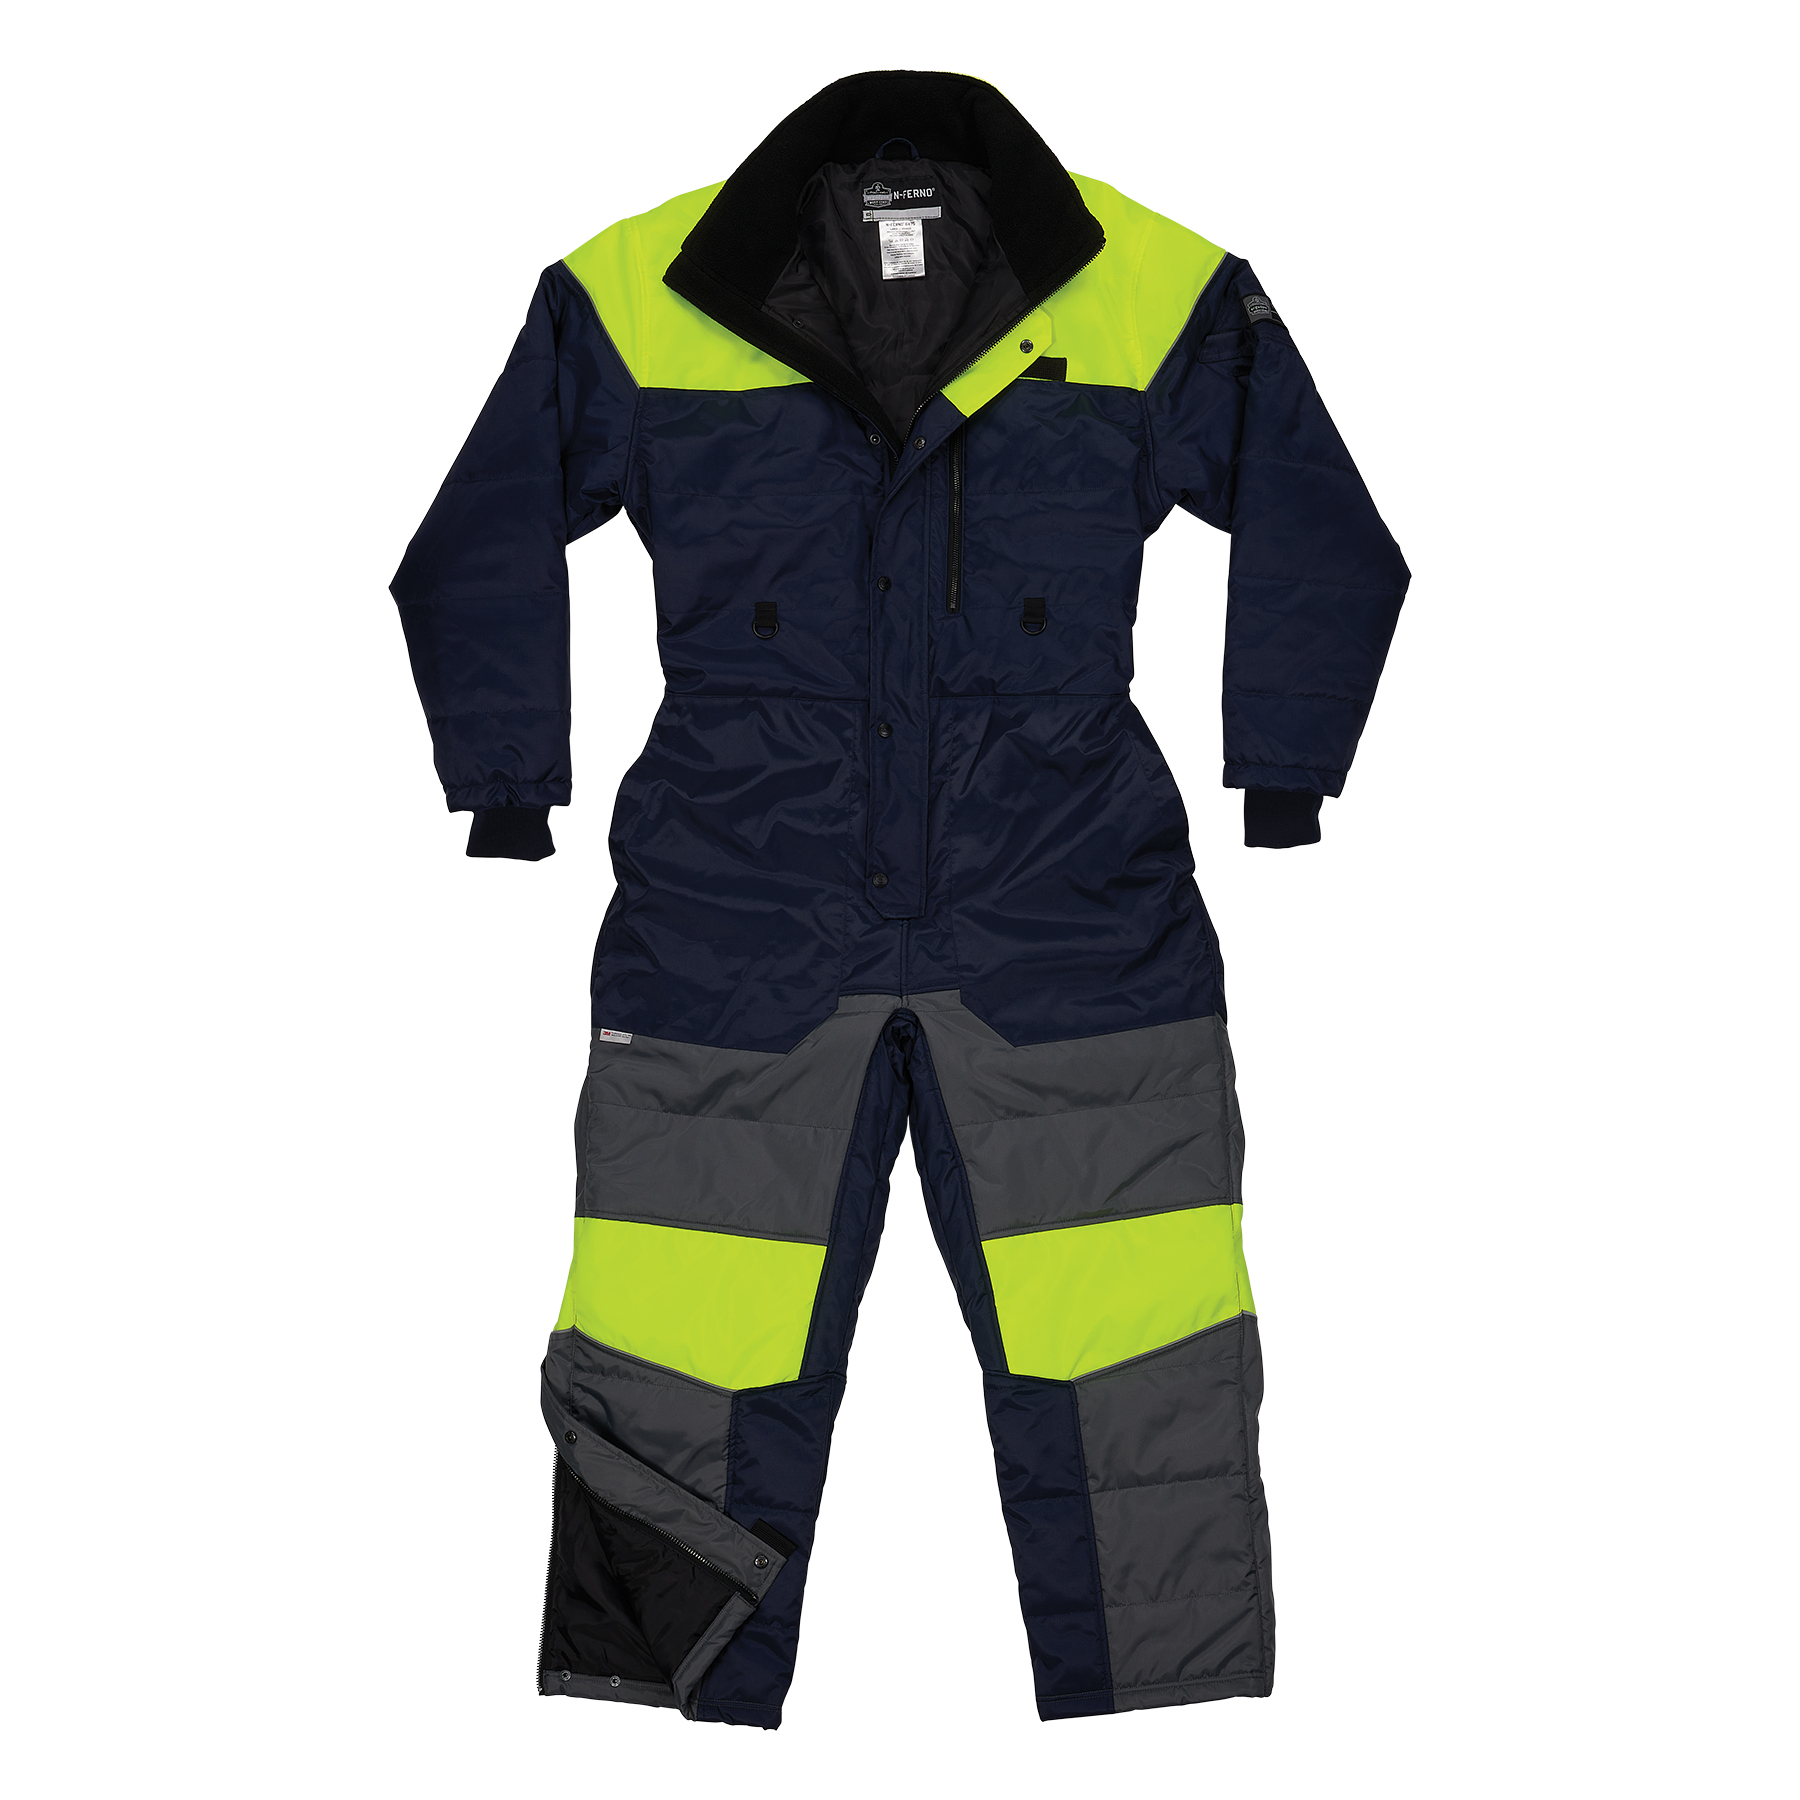 Freezer Wear Jackets, pants, vests, coveralls for work. Ideal for meat  lockers and coolers, dairy, salad and floral processing, r…